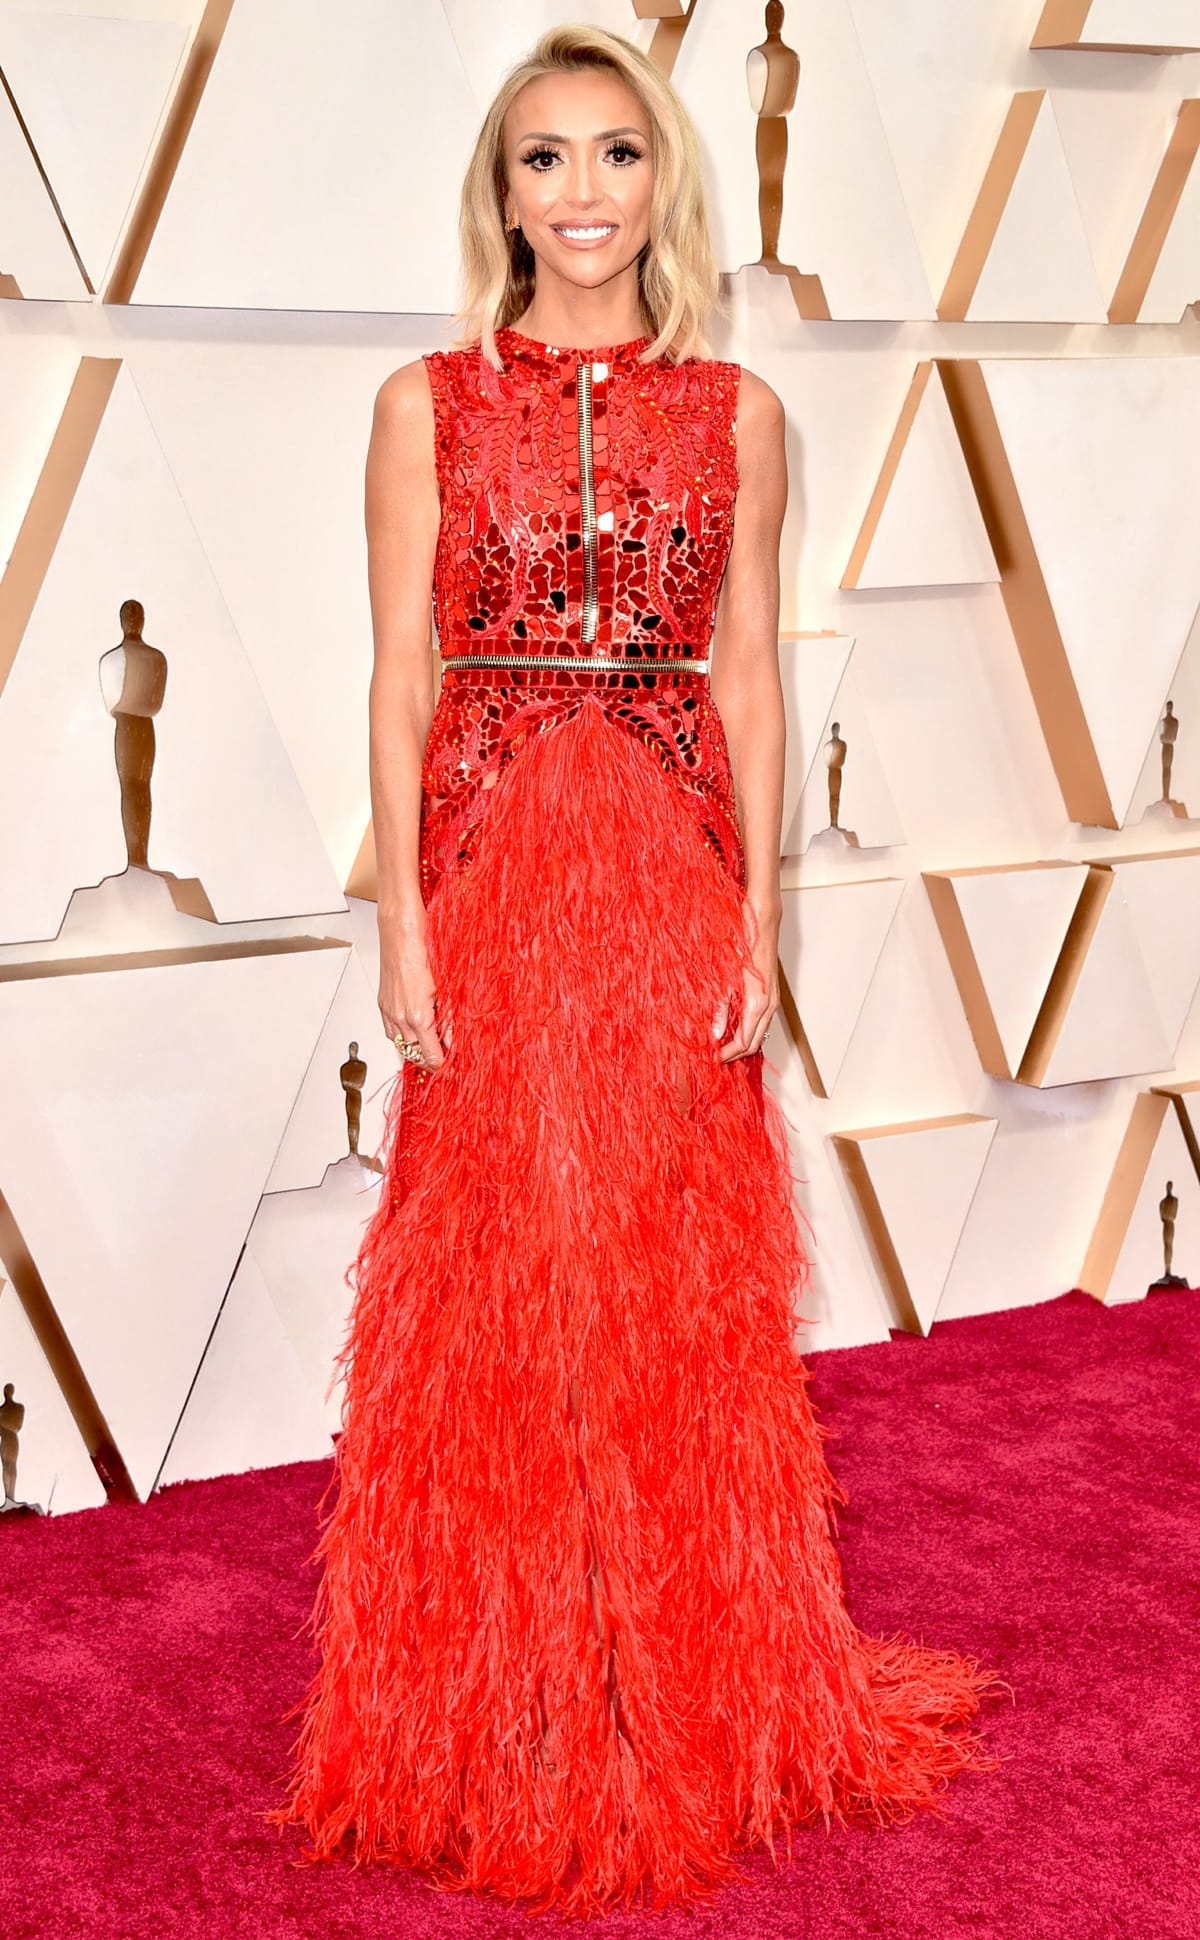 Giuliana Rancic stood tall at 5 feet 8 inches (172.7 cm) while wearing a dazzling sleeveless dress by Atelier Zuhra at the 92nd Annual Academy Awards